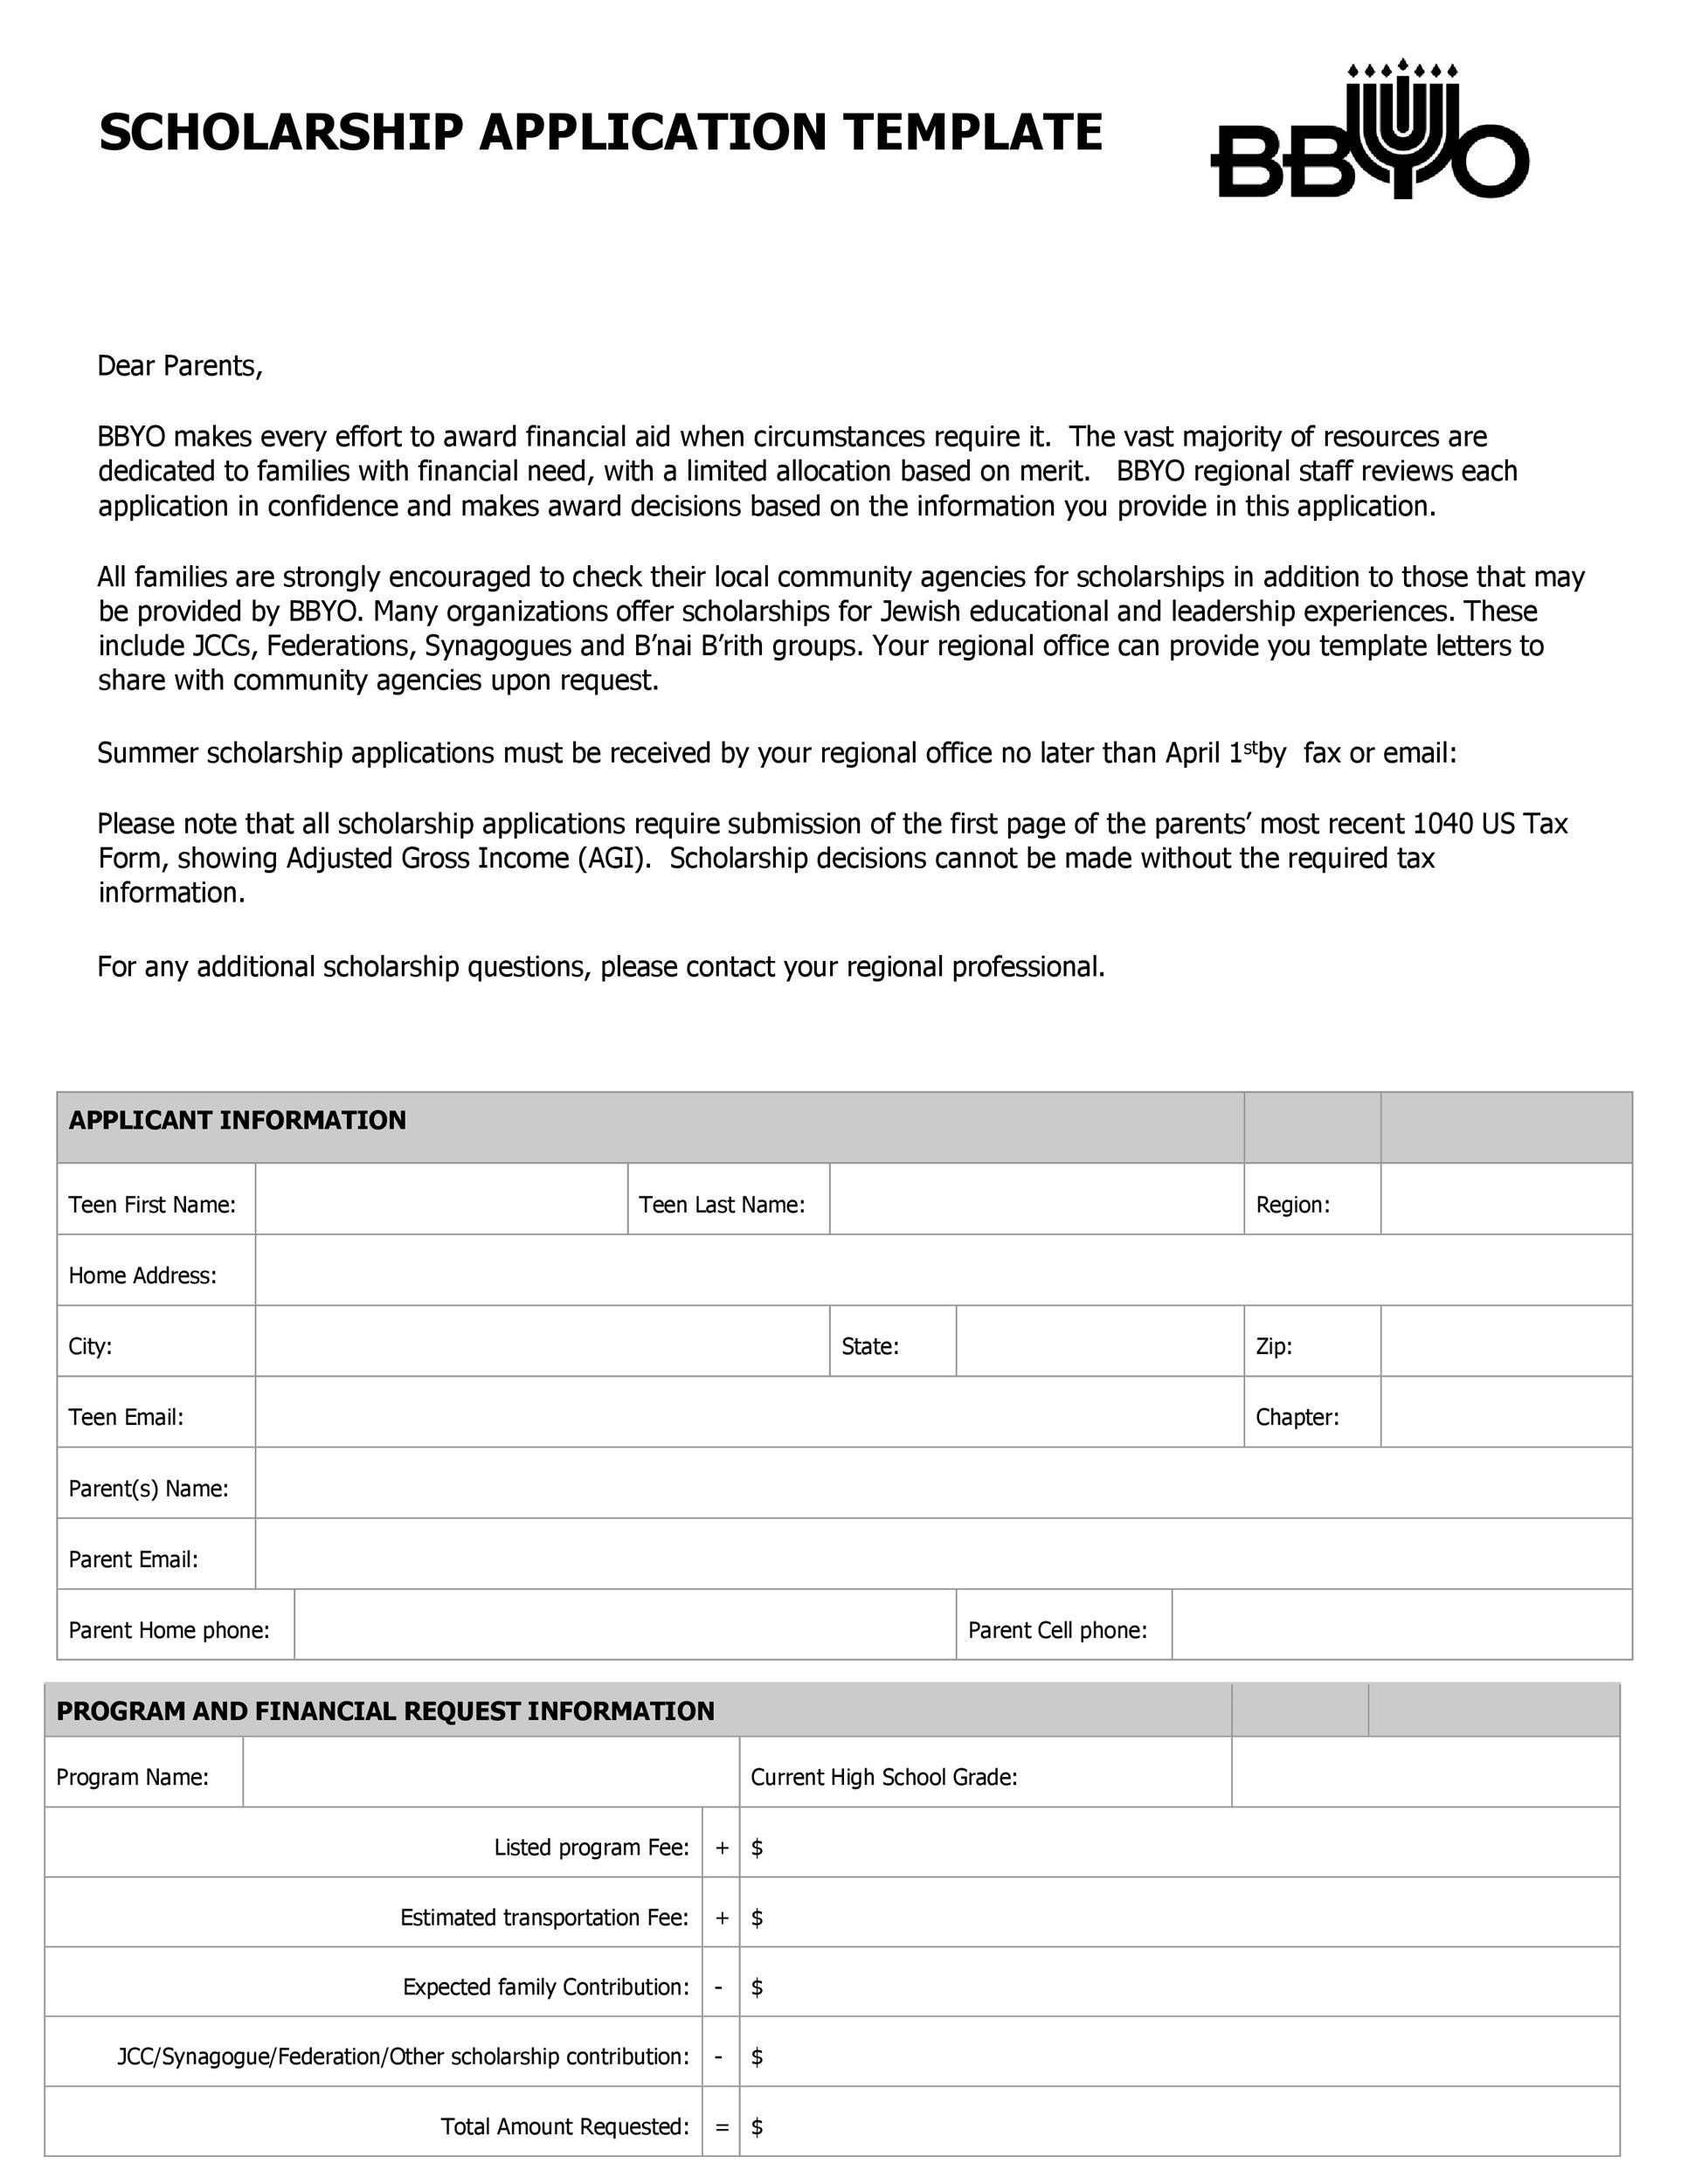 20+ Financial Support Application Scholarship Application Letter Sample